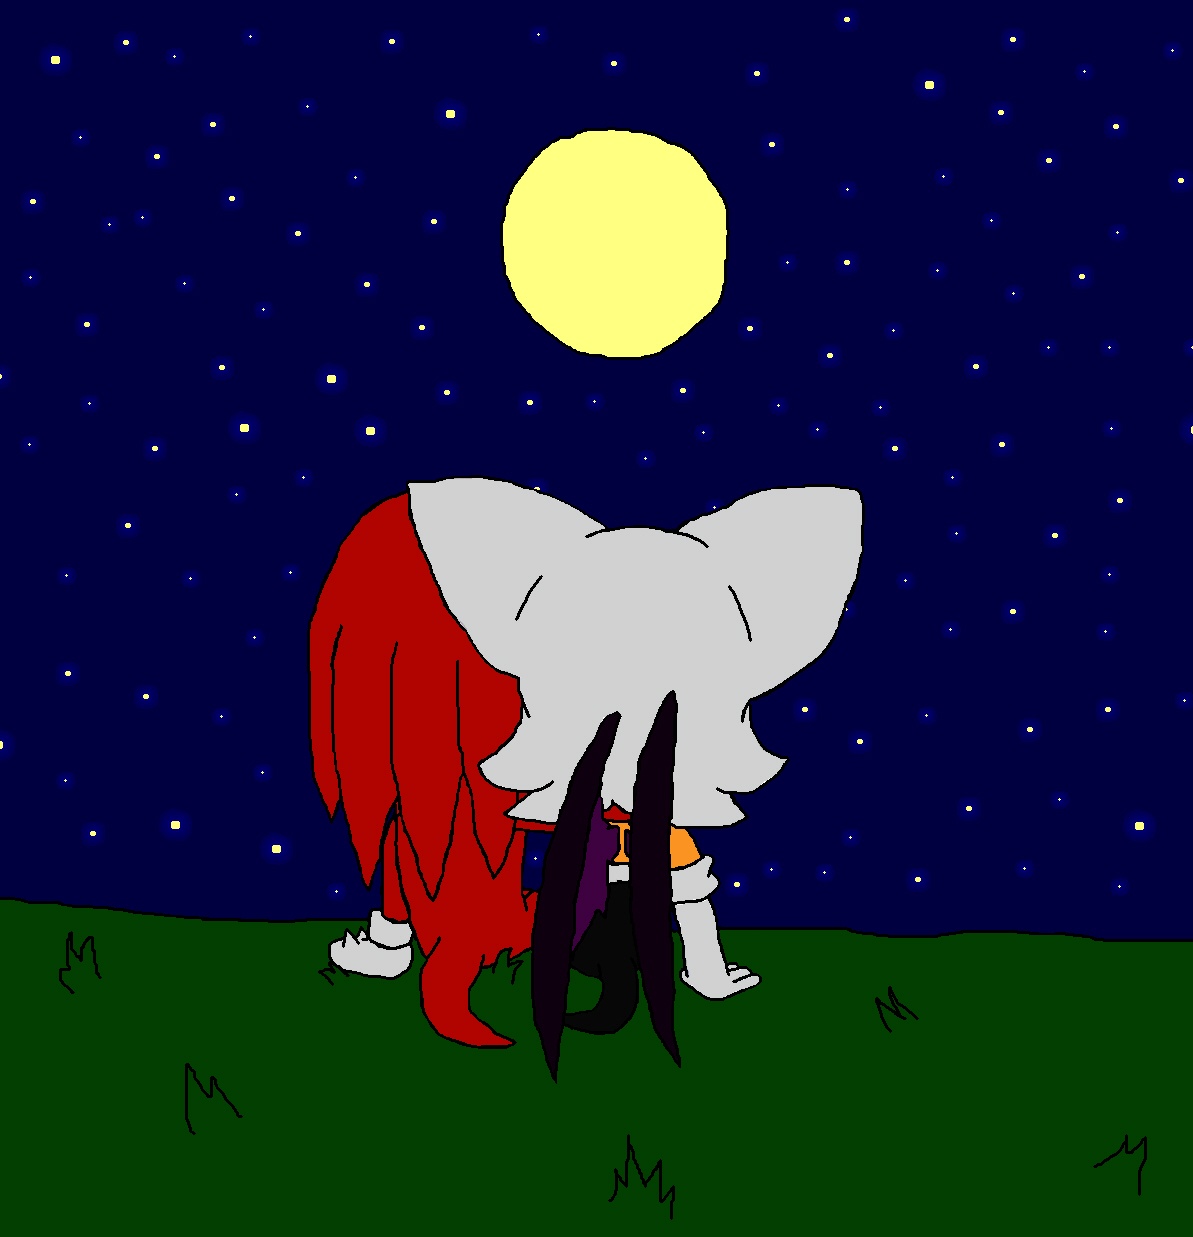 Under The Moon (Knouge) by knux_and_rouge_fan